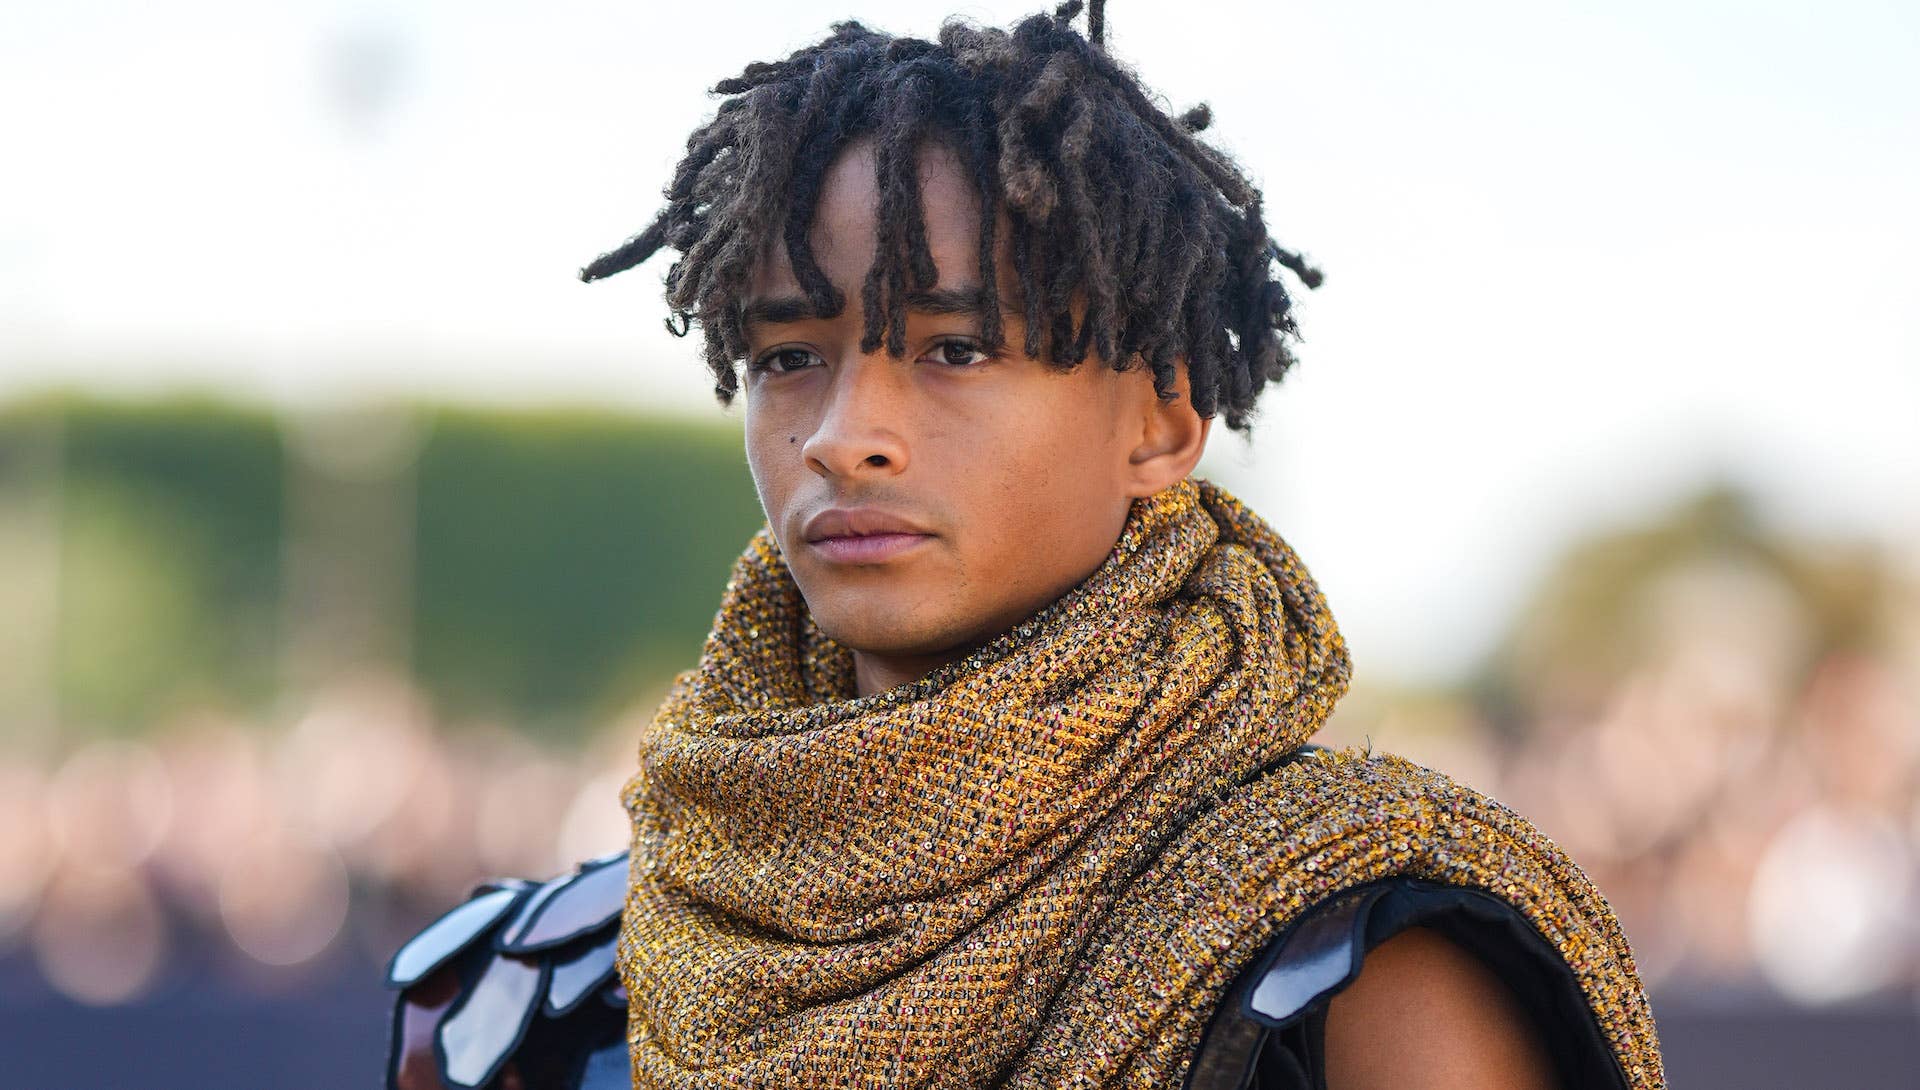 Jaden Smith Announces Video for “Still in Love” With Tearful Clip